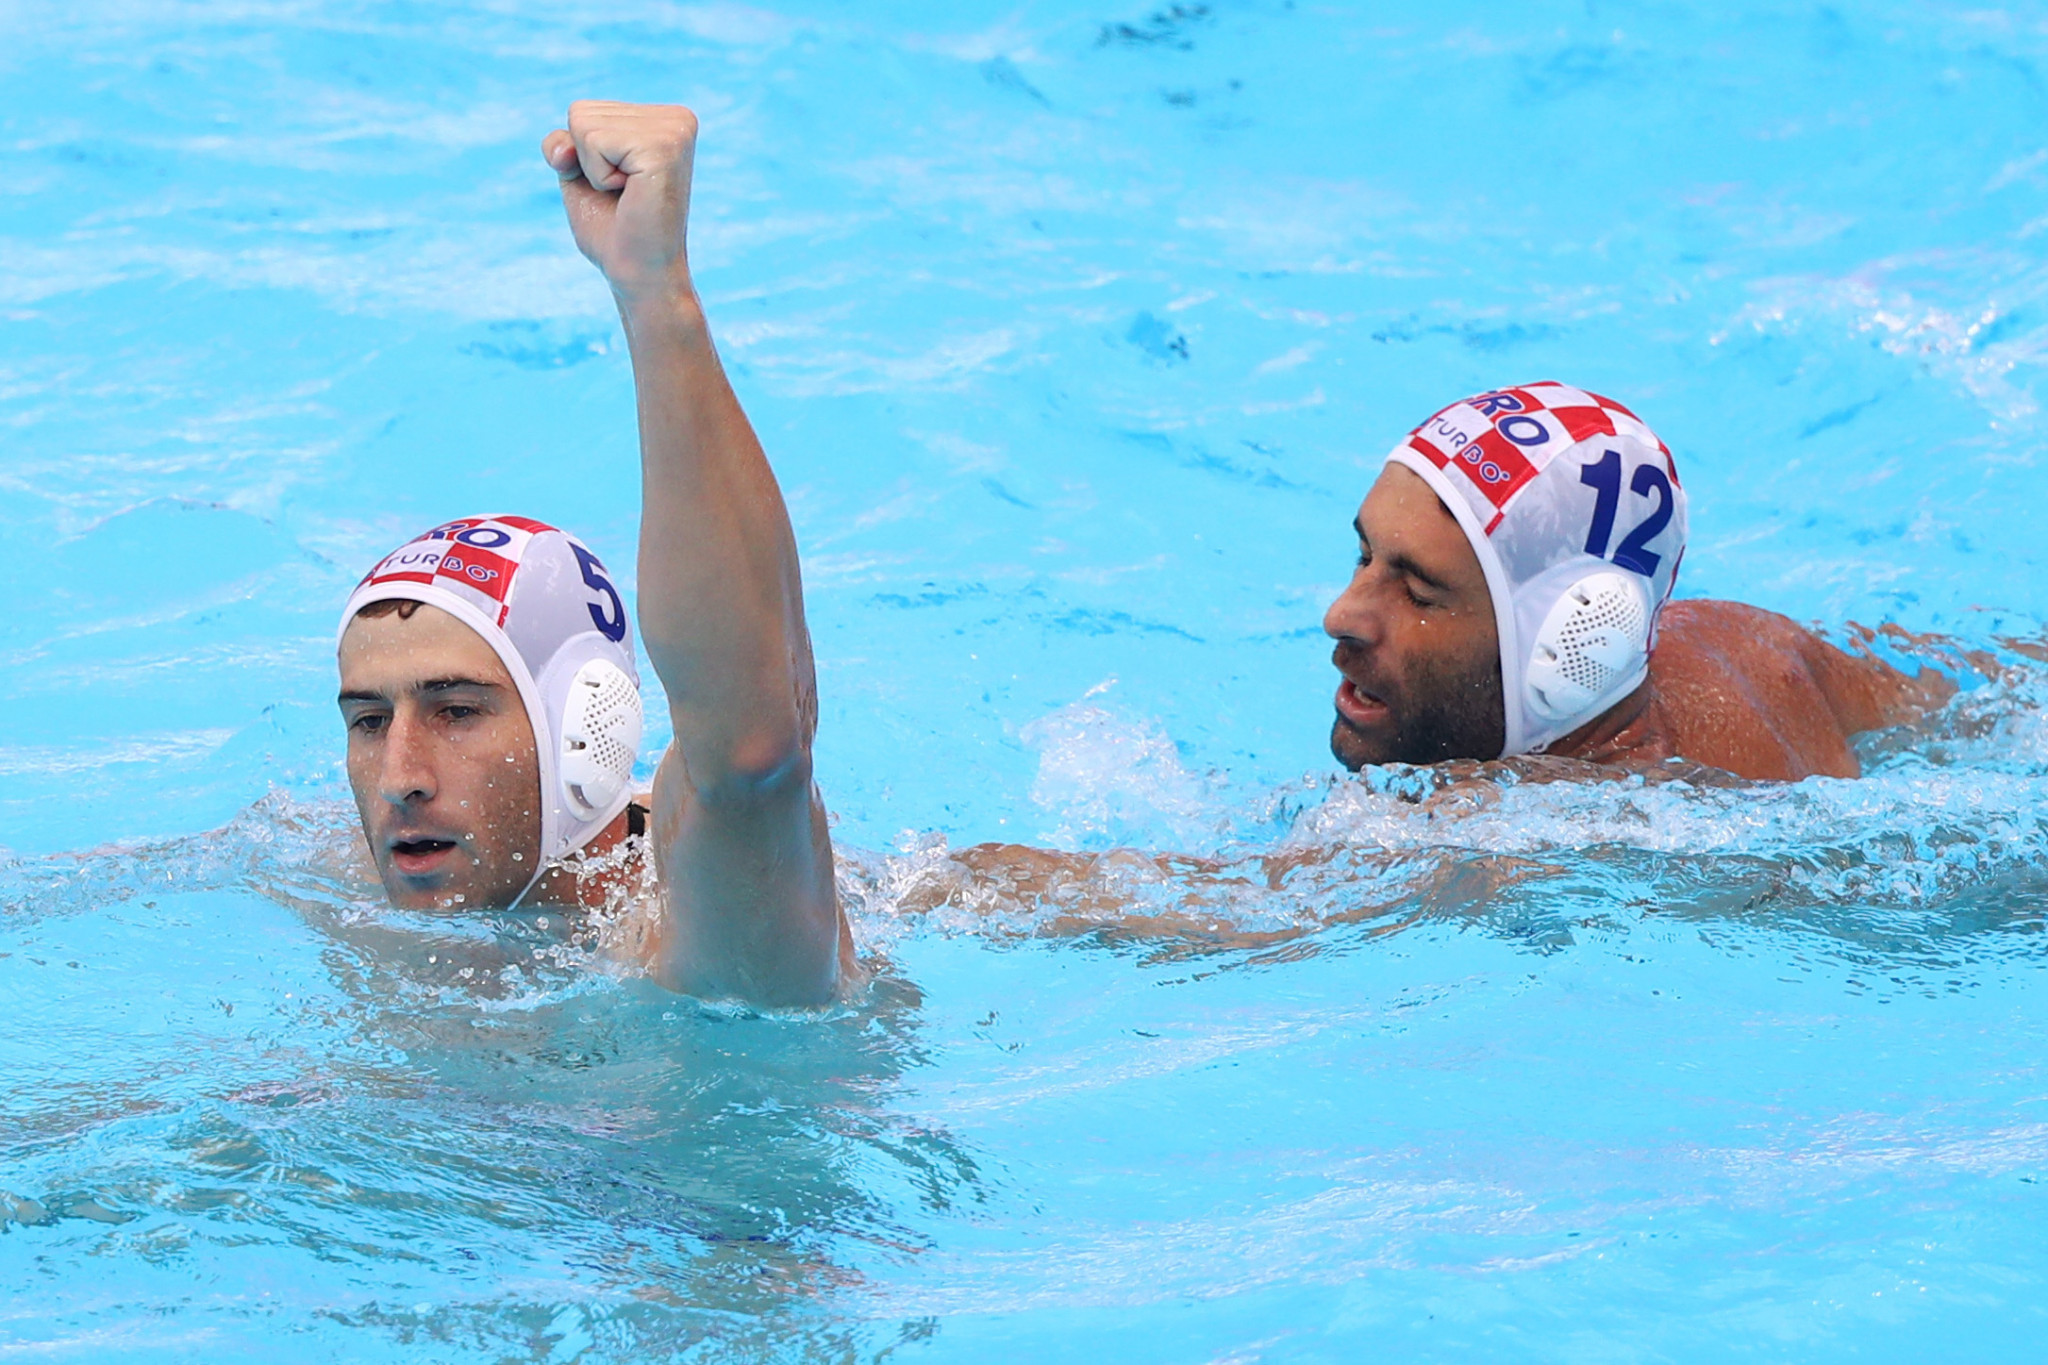 Rio 2016 medallists Croatia start with win in men's water polo Tokyo 2020 qualification